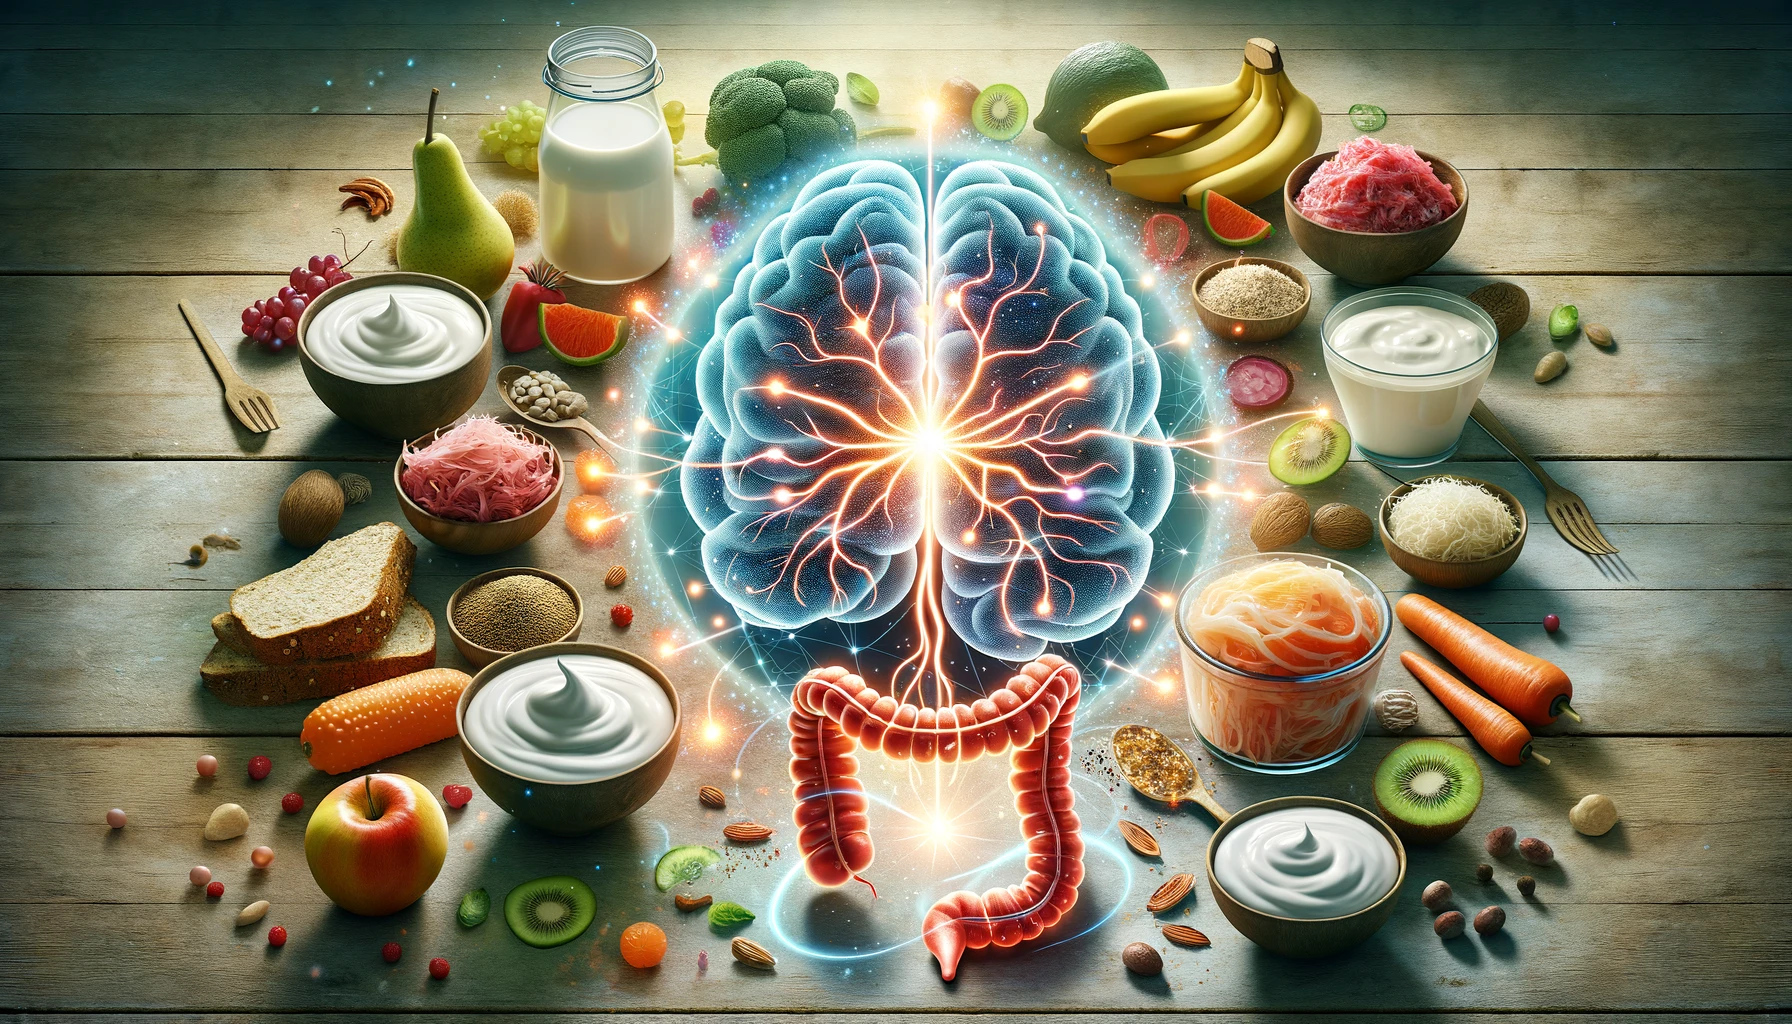 Gut Brain Connection Image Understanding the Relationship Between Nutrition and Mental Health - Health & Nutrition 1